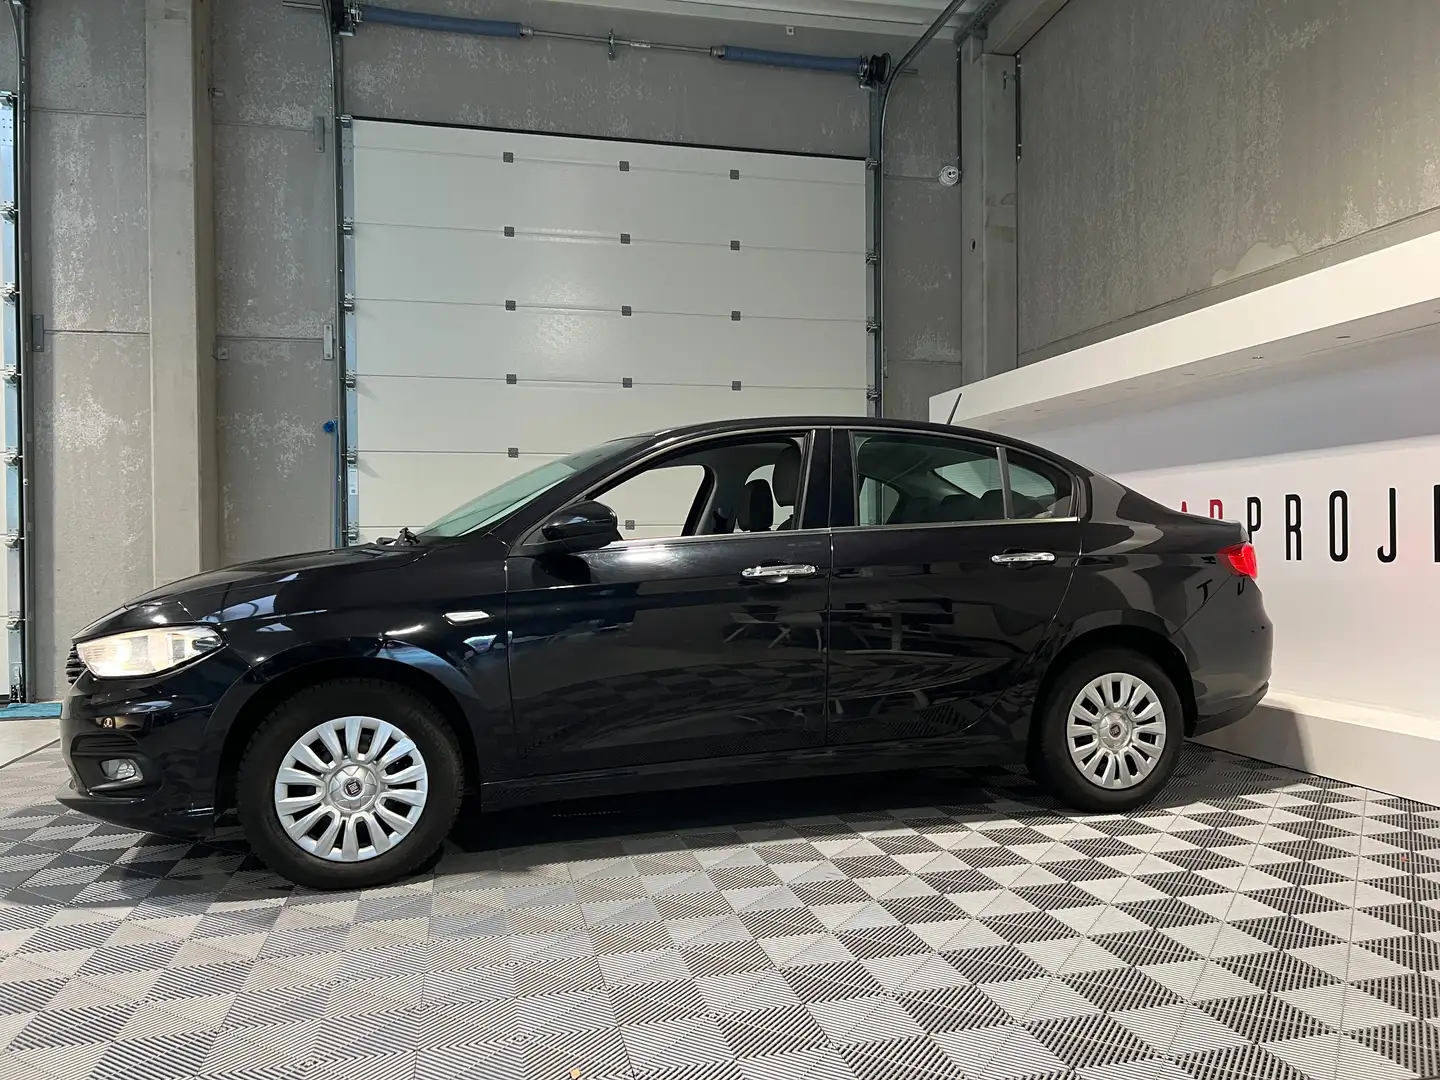 Fiat Tipo 1.3 MultiJet **MARCHAND OU EXPORT** crna - 2